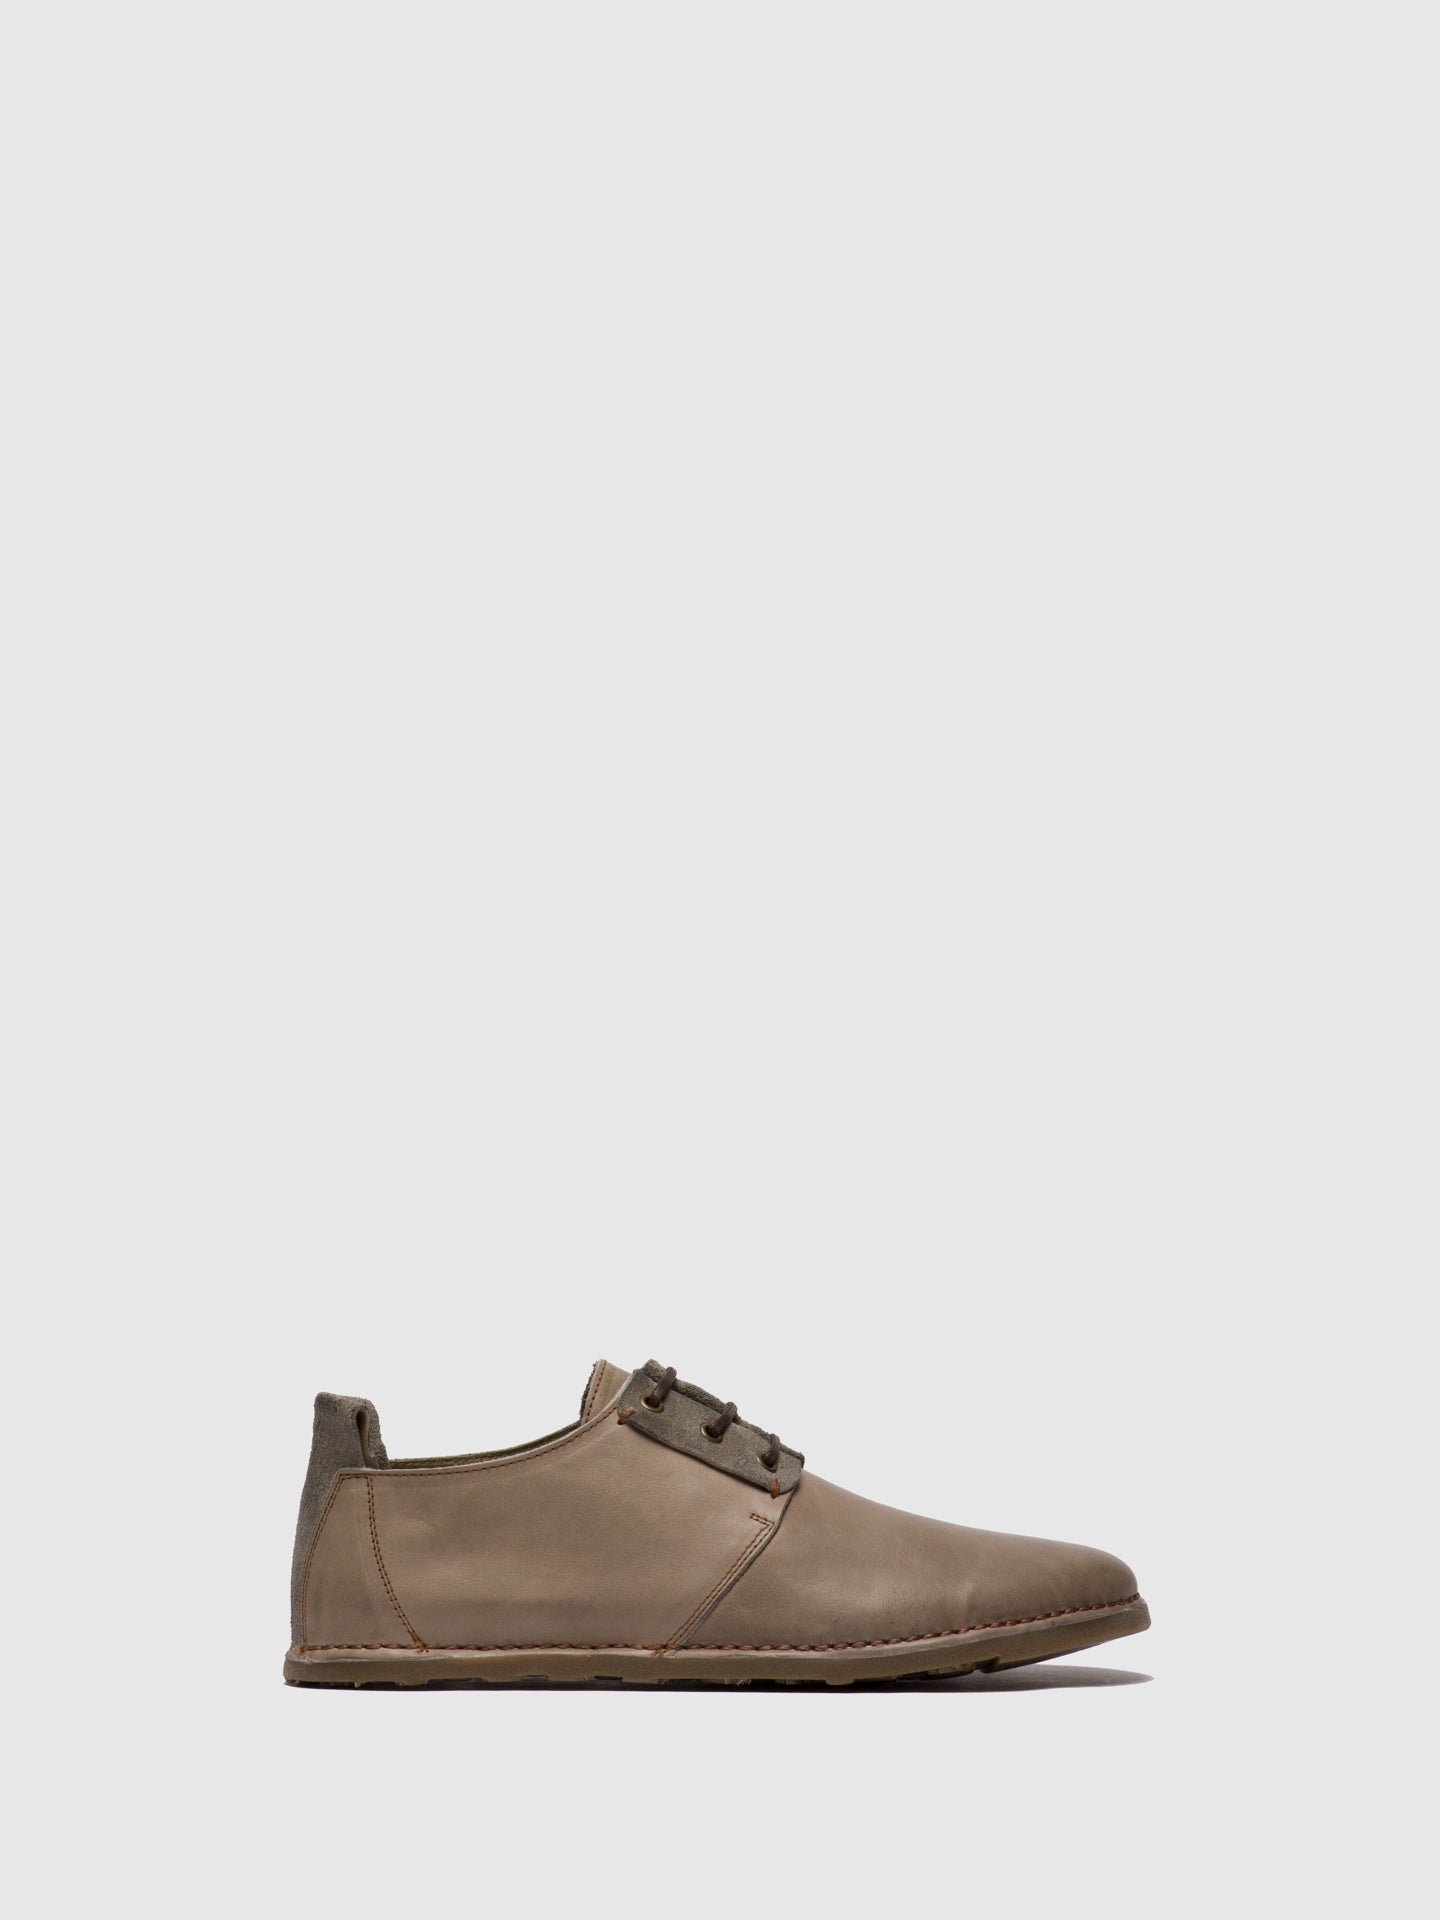 Fly London Wheat Lace-up Shoes